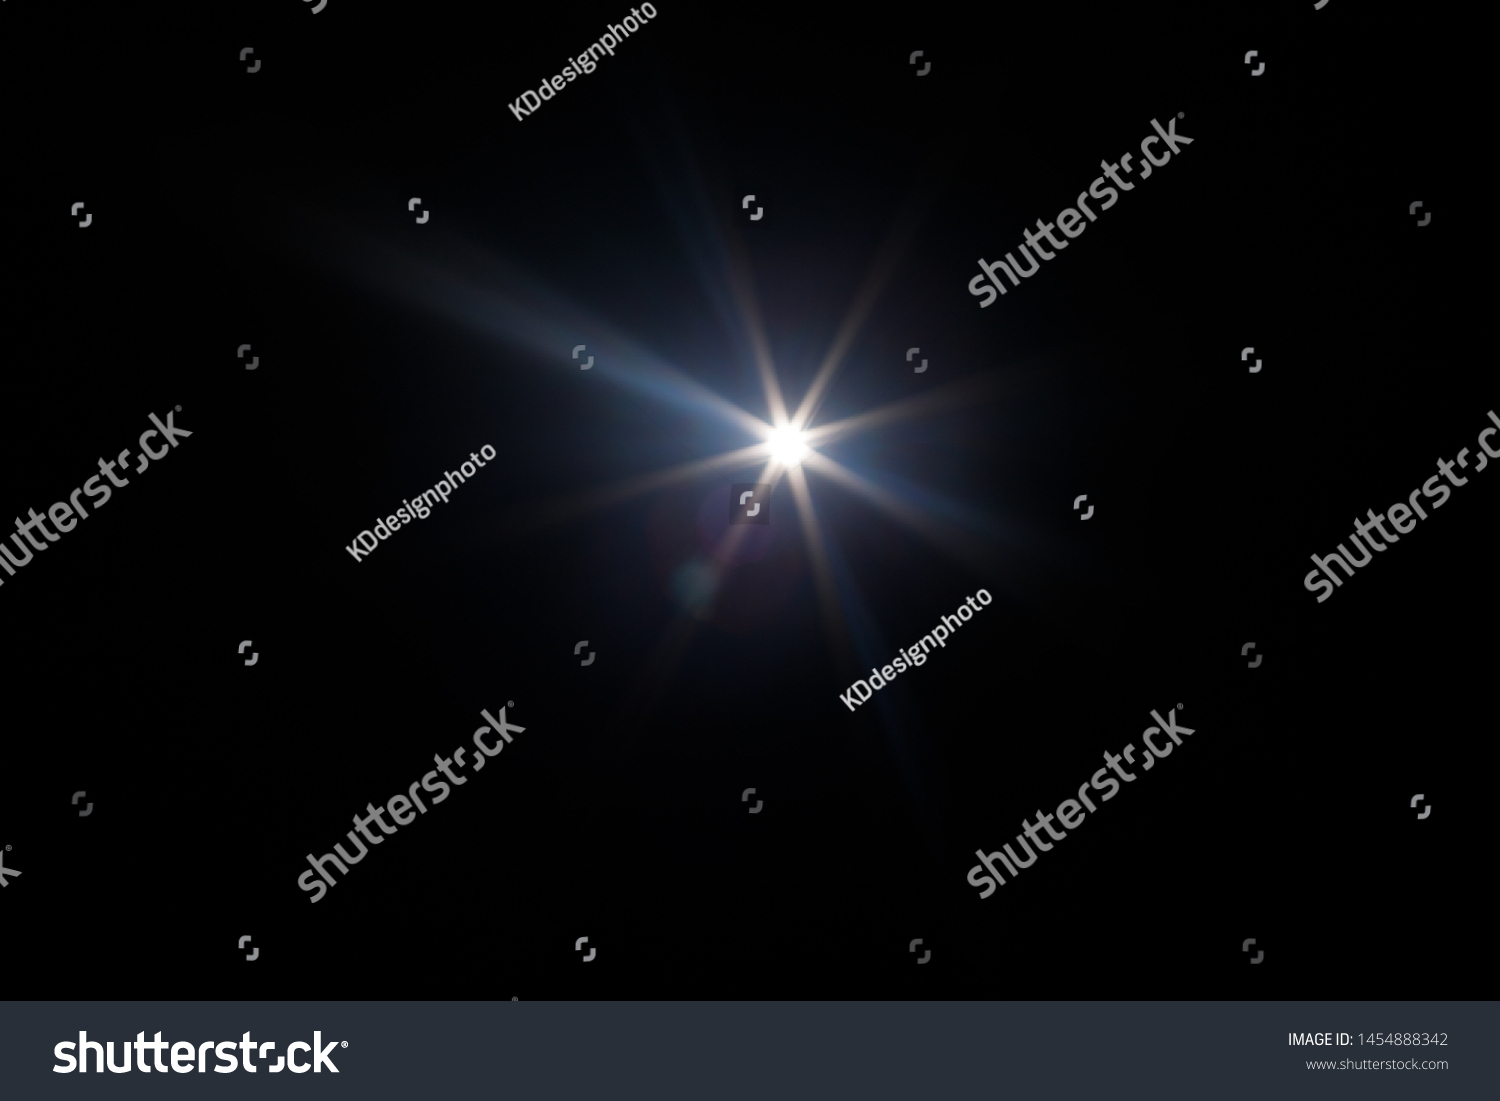 Lens Flare. Light over black background. Easy to add overlay or screen filter over photos. Abstract sun burst with digital lens flare background. Gleams rounded and hexagonal shapes, rainbow halo. #1454888342